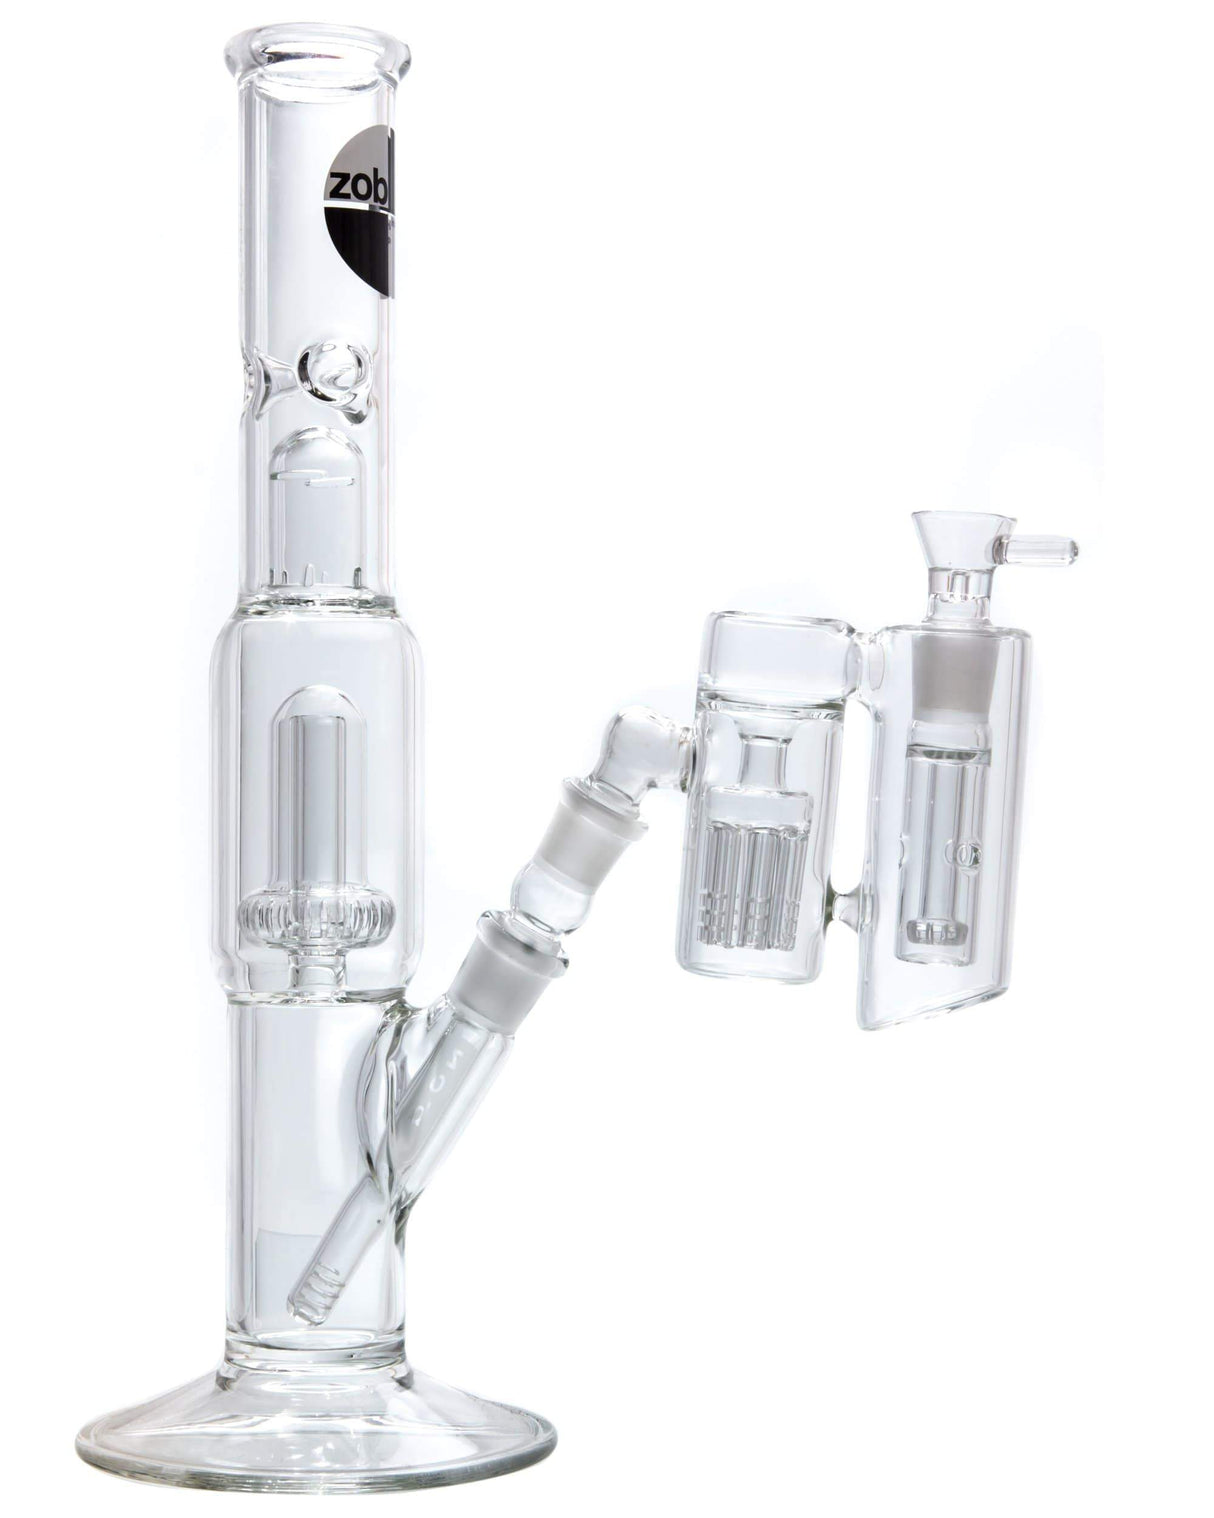 45˚ Showerhead to Tree Perc Dual Chamber Ashcatcher in Clear Glass - Side View